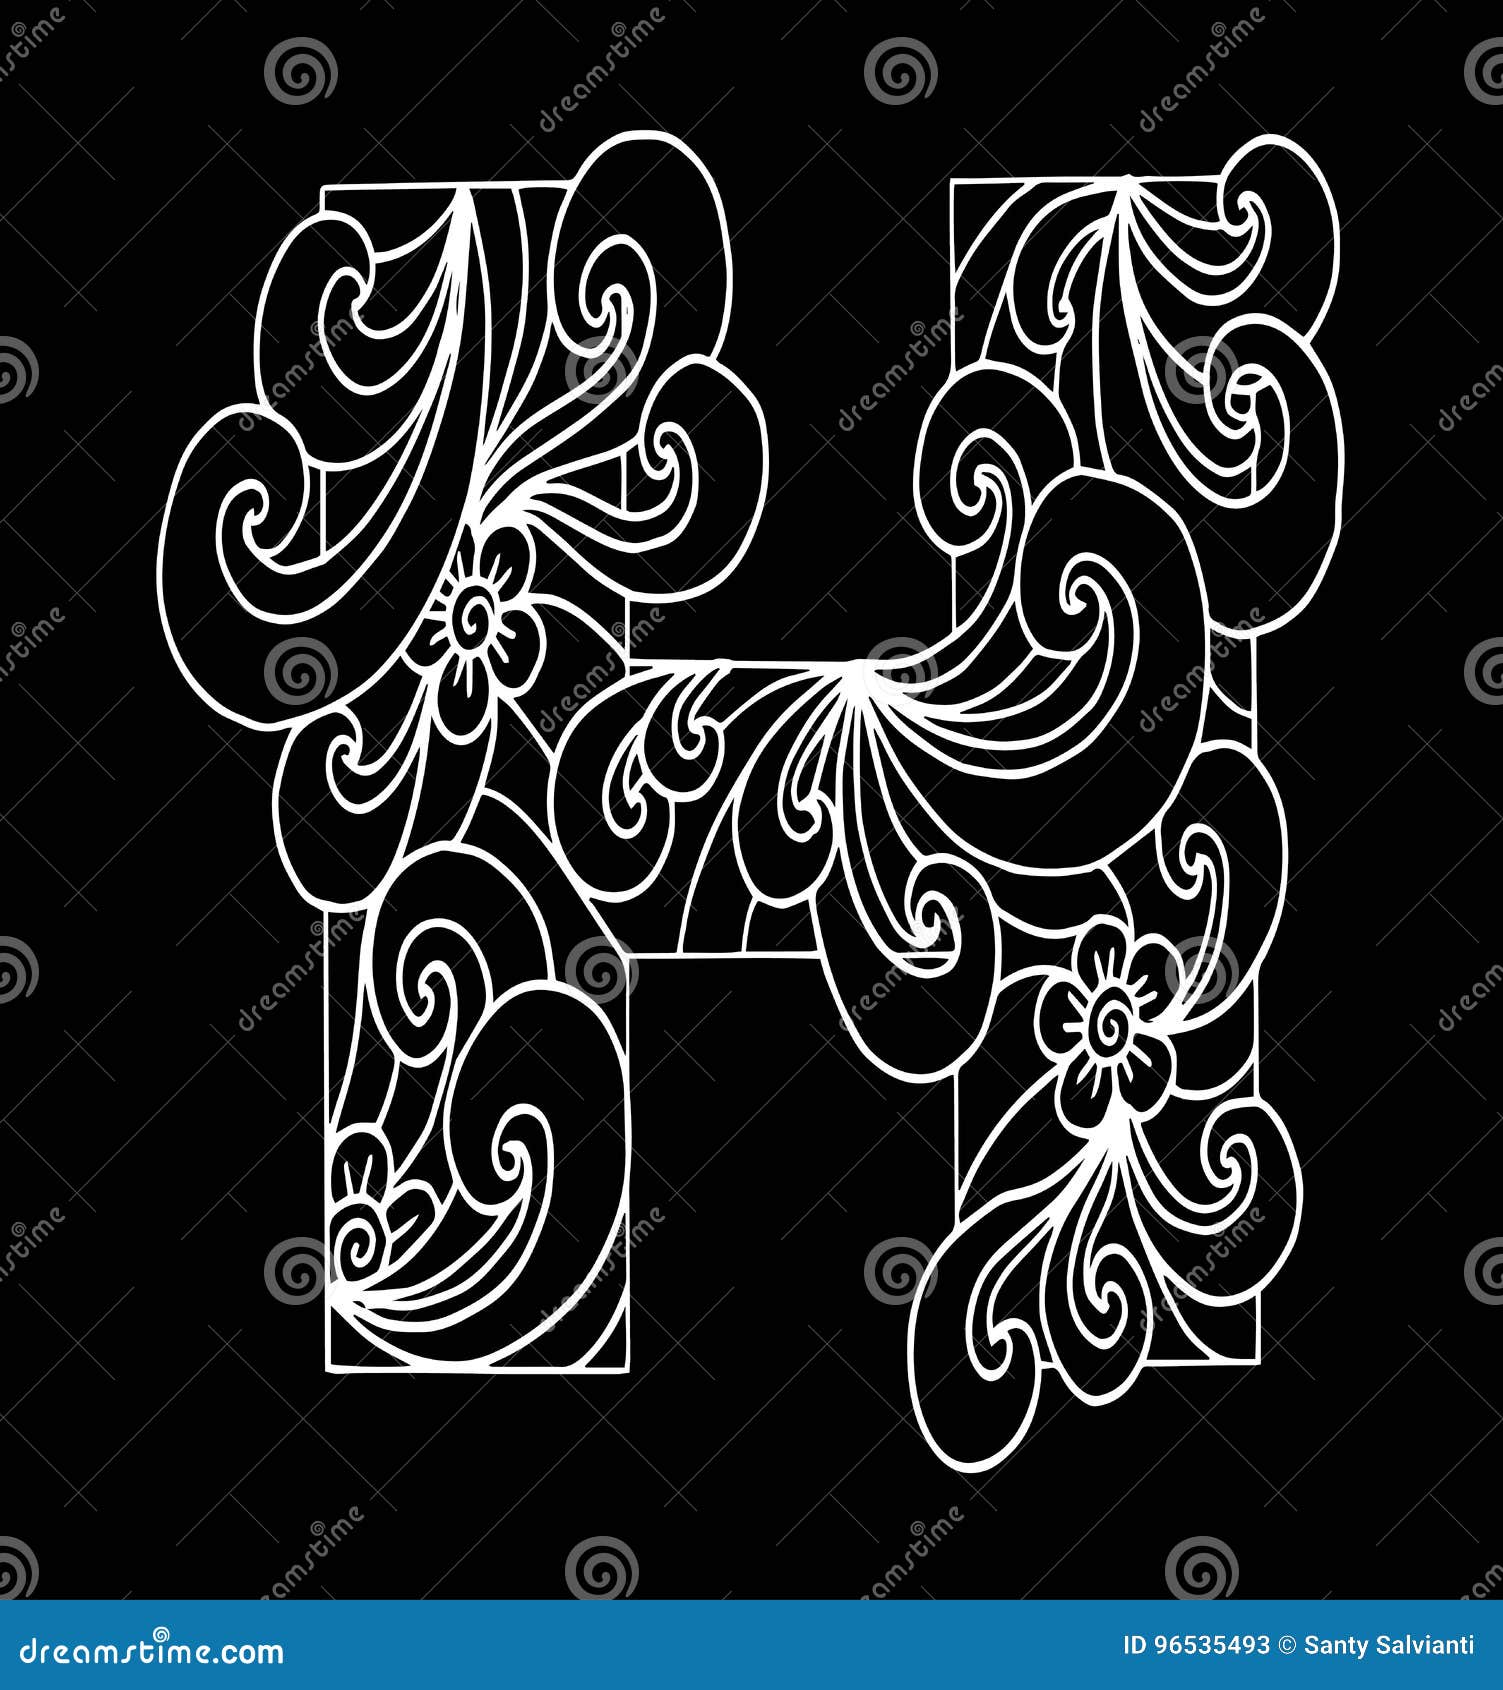 Zentangle Stylized Alphabet Letter H In Doodle Style Stock Vector